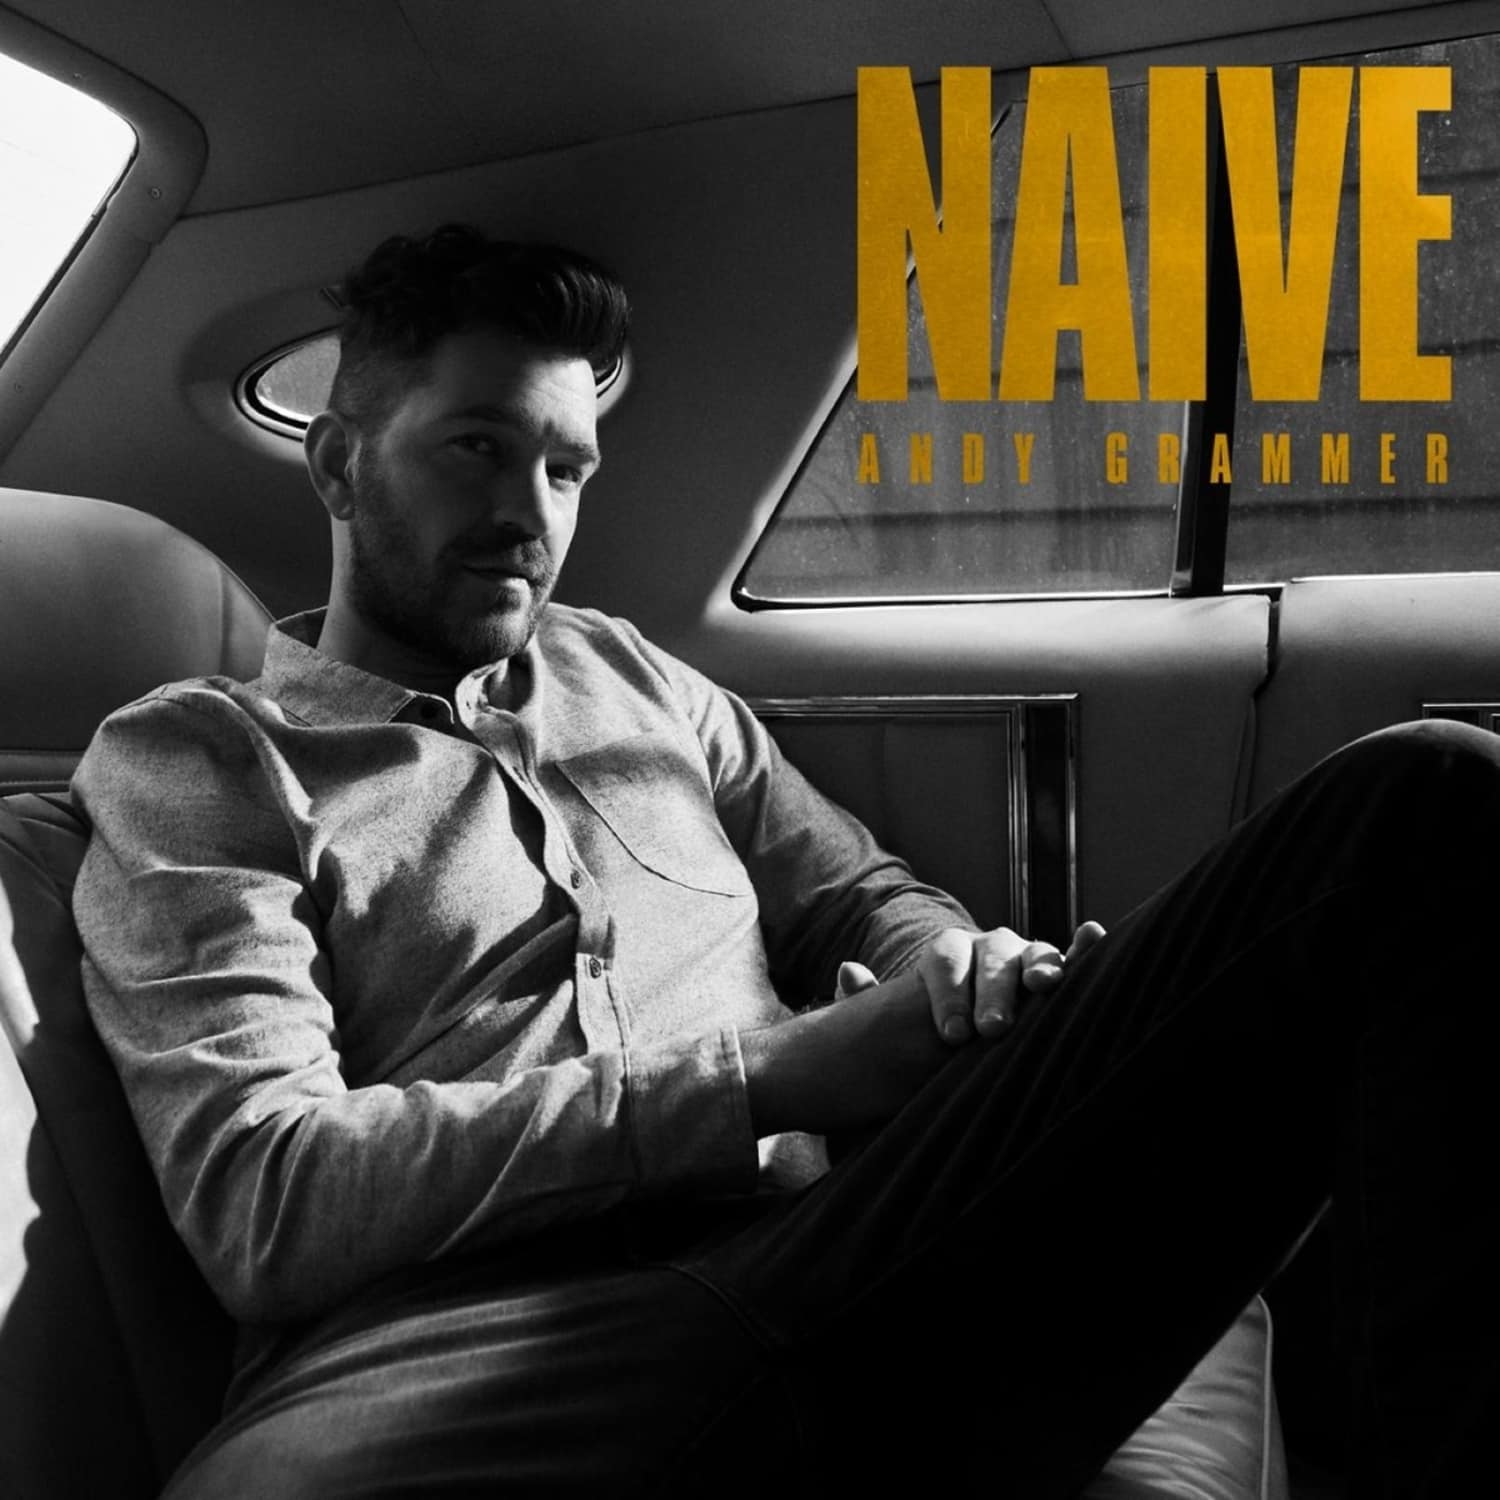 Andy Grammer - NAVE 